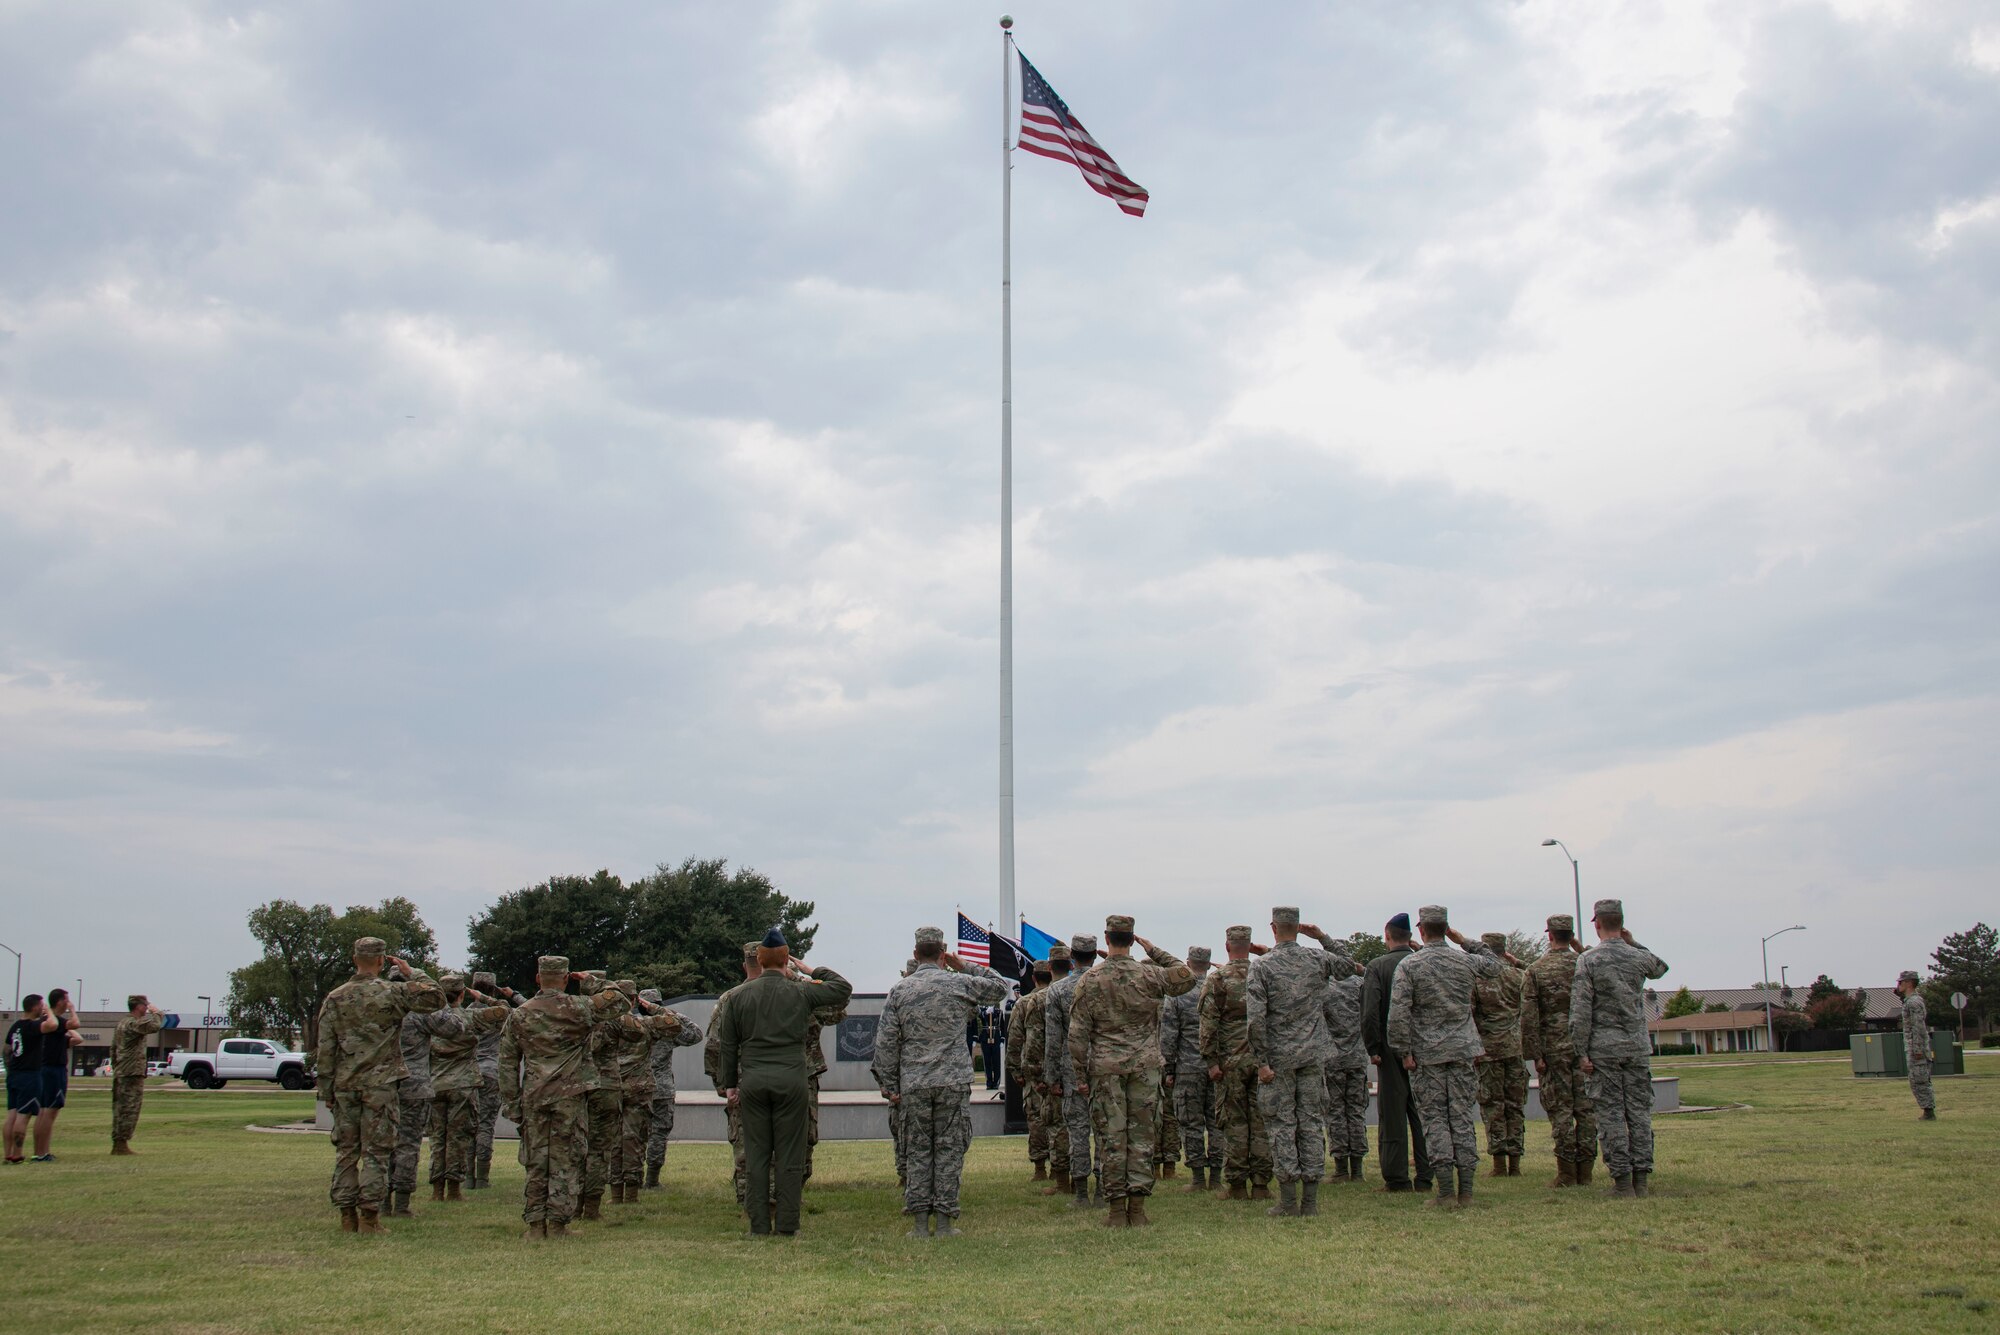 Members of the 97th Air Mobility Wing salute the flag at reveille during the closing ceremony of the POW/MIA Recognition Day